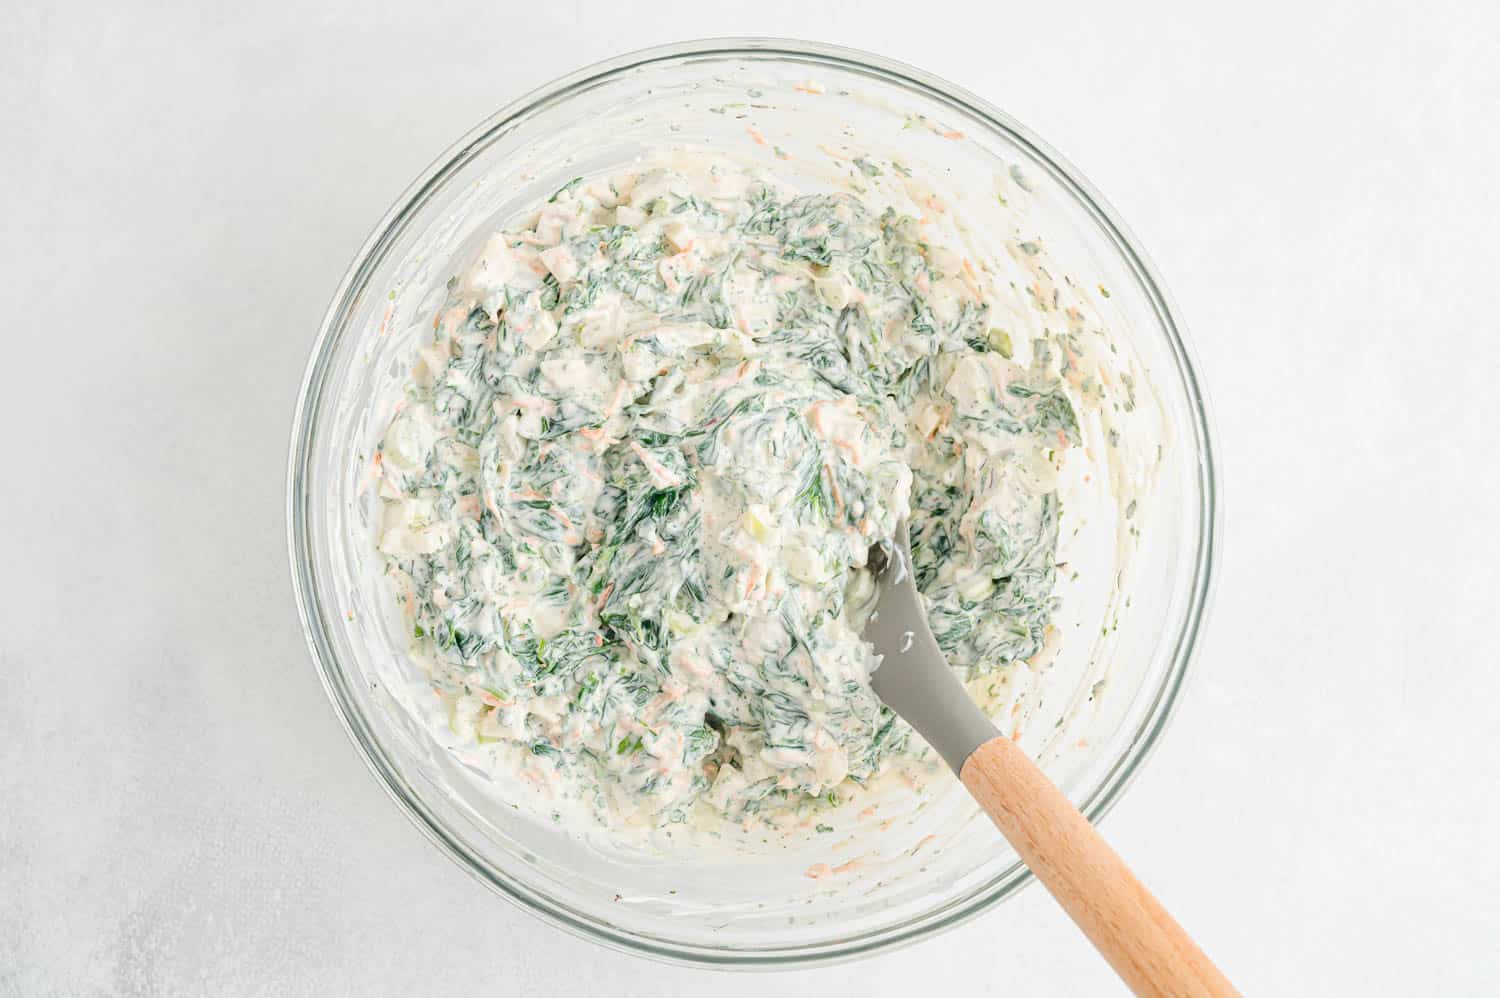 Spinach dip ingredients mixed together.